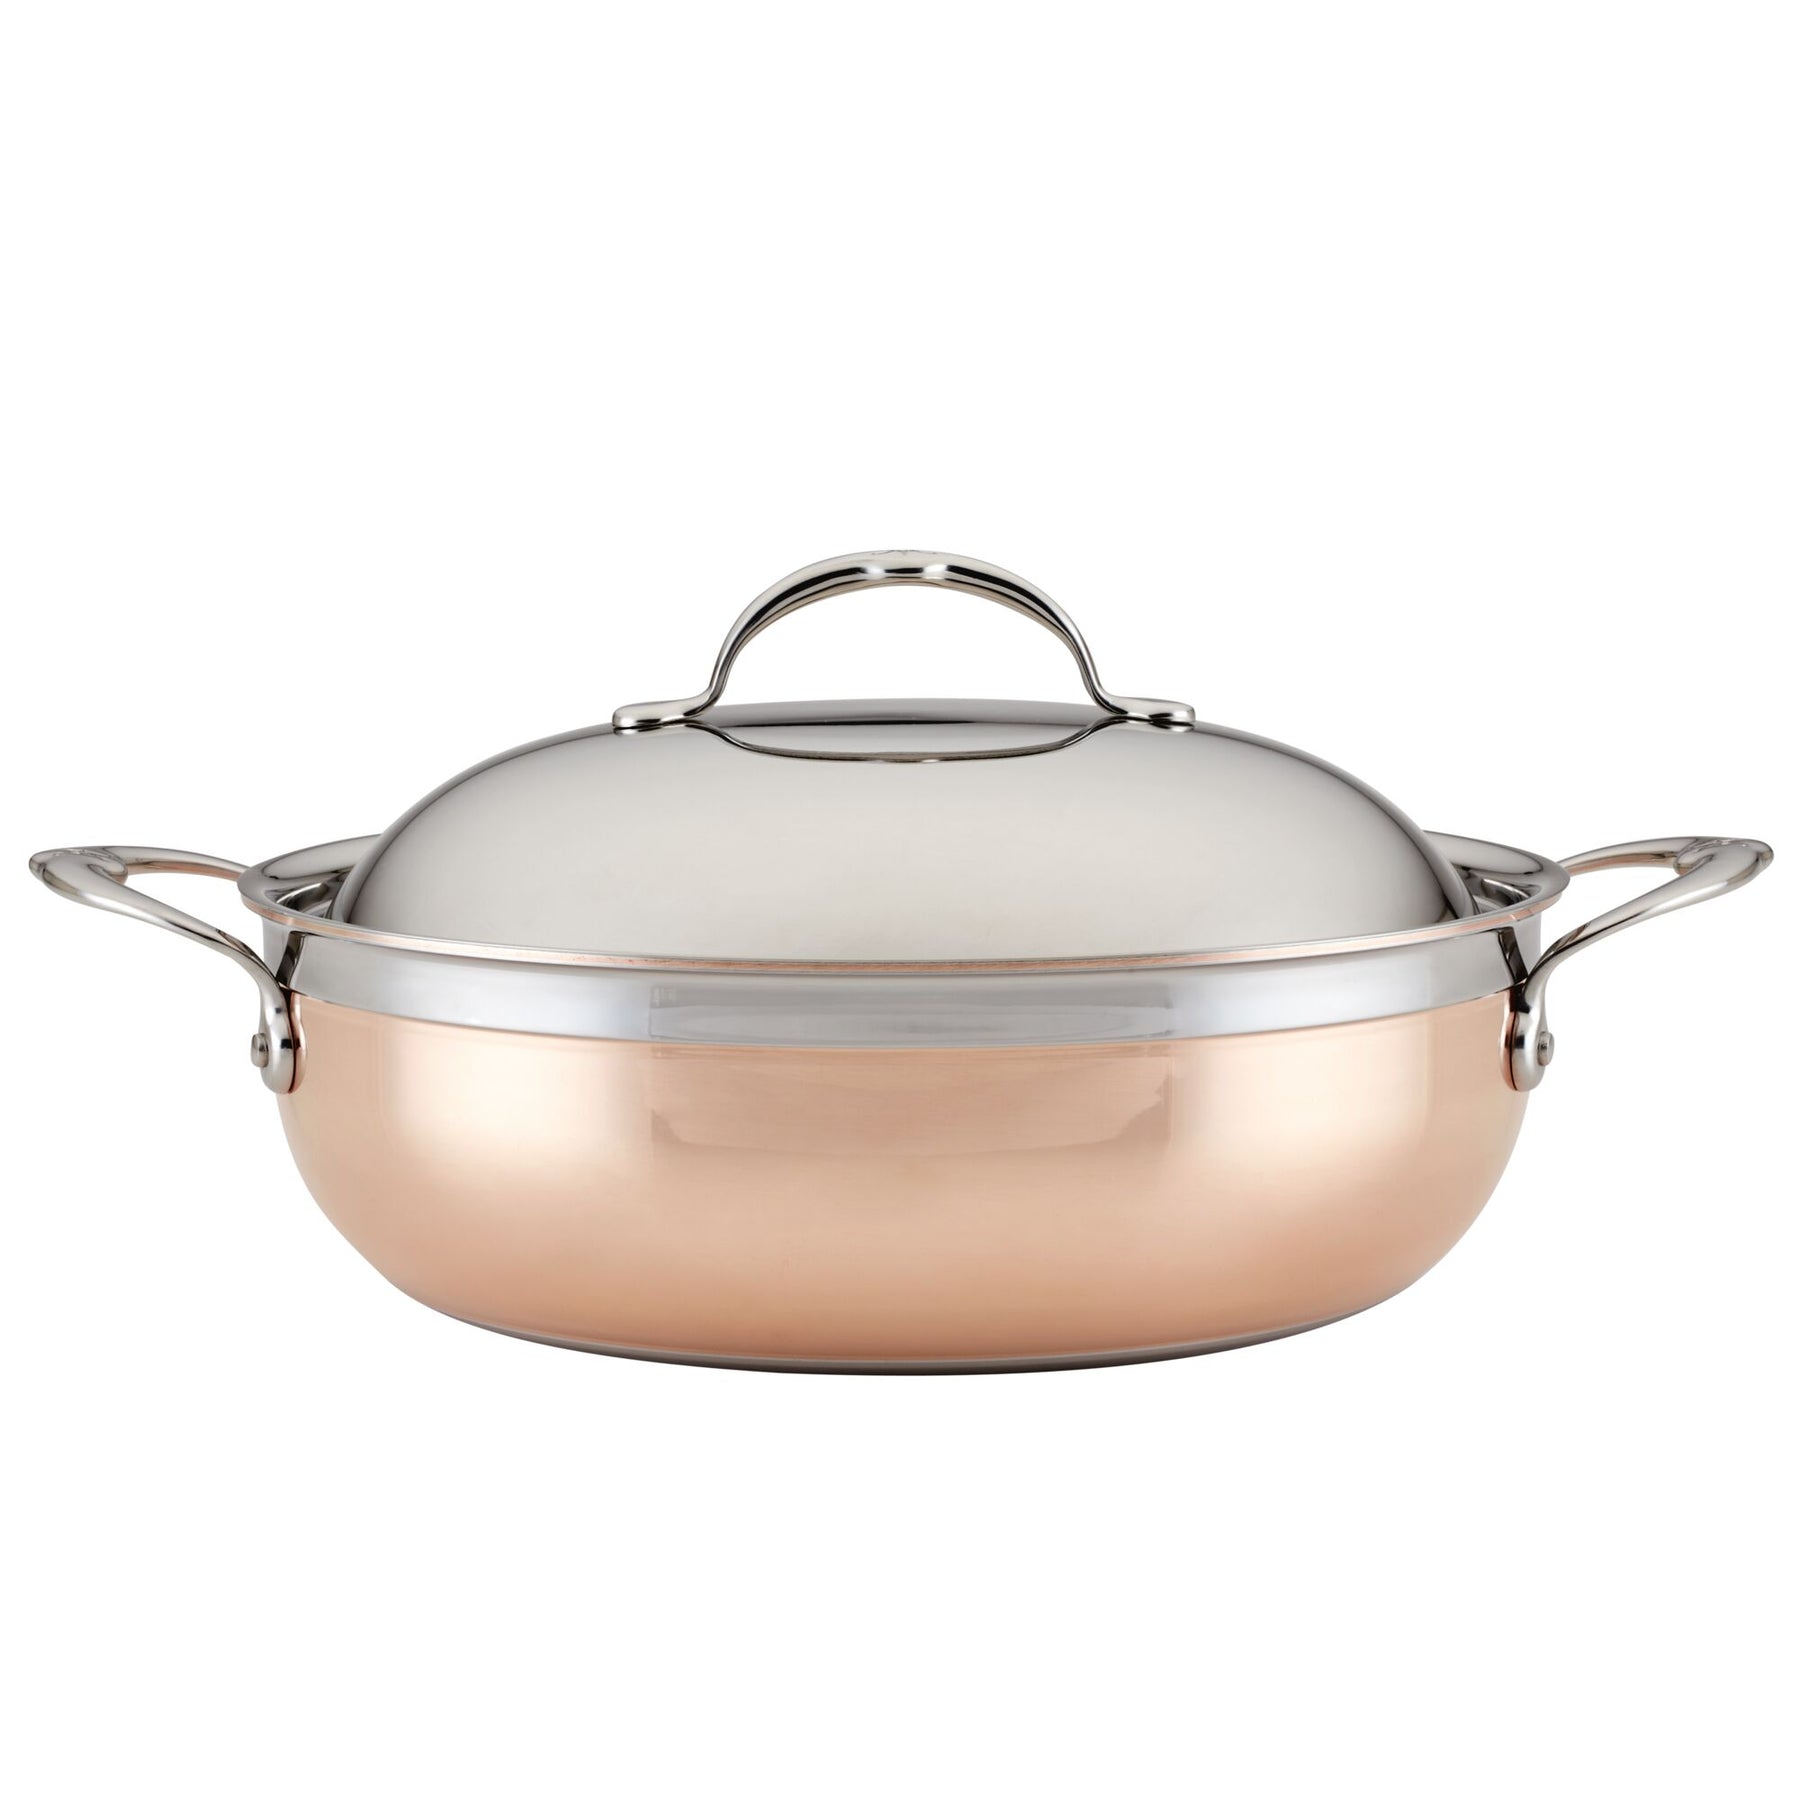 All-Clad D5 Induction 5 Quart Dutch Oven, Brushed S/S